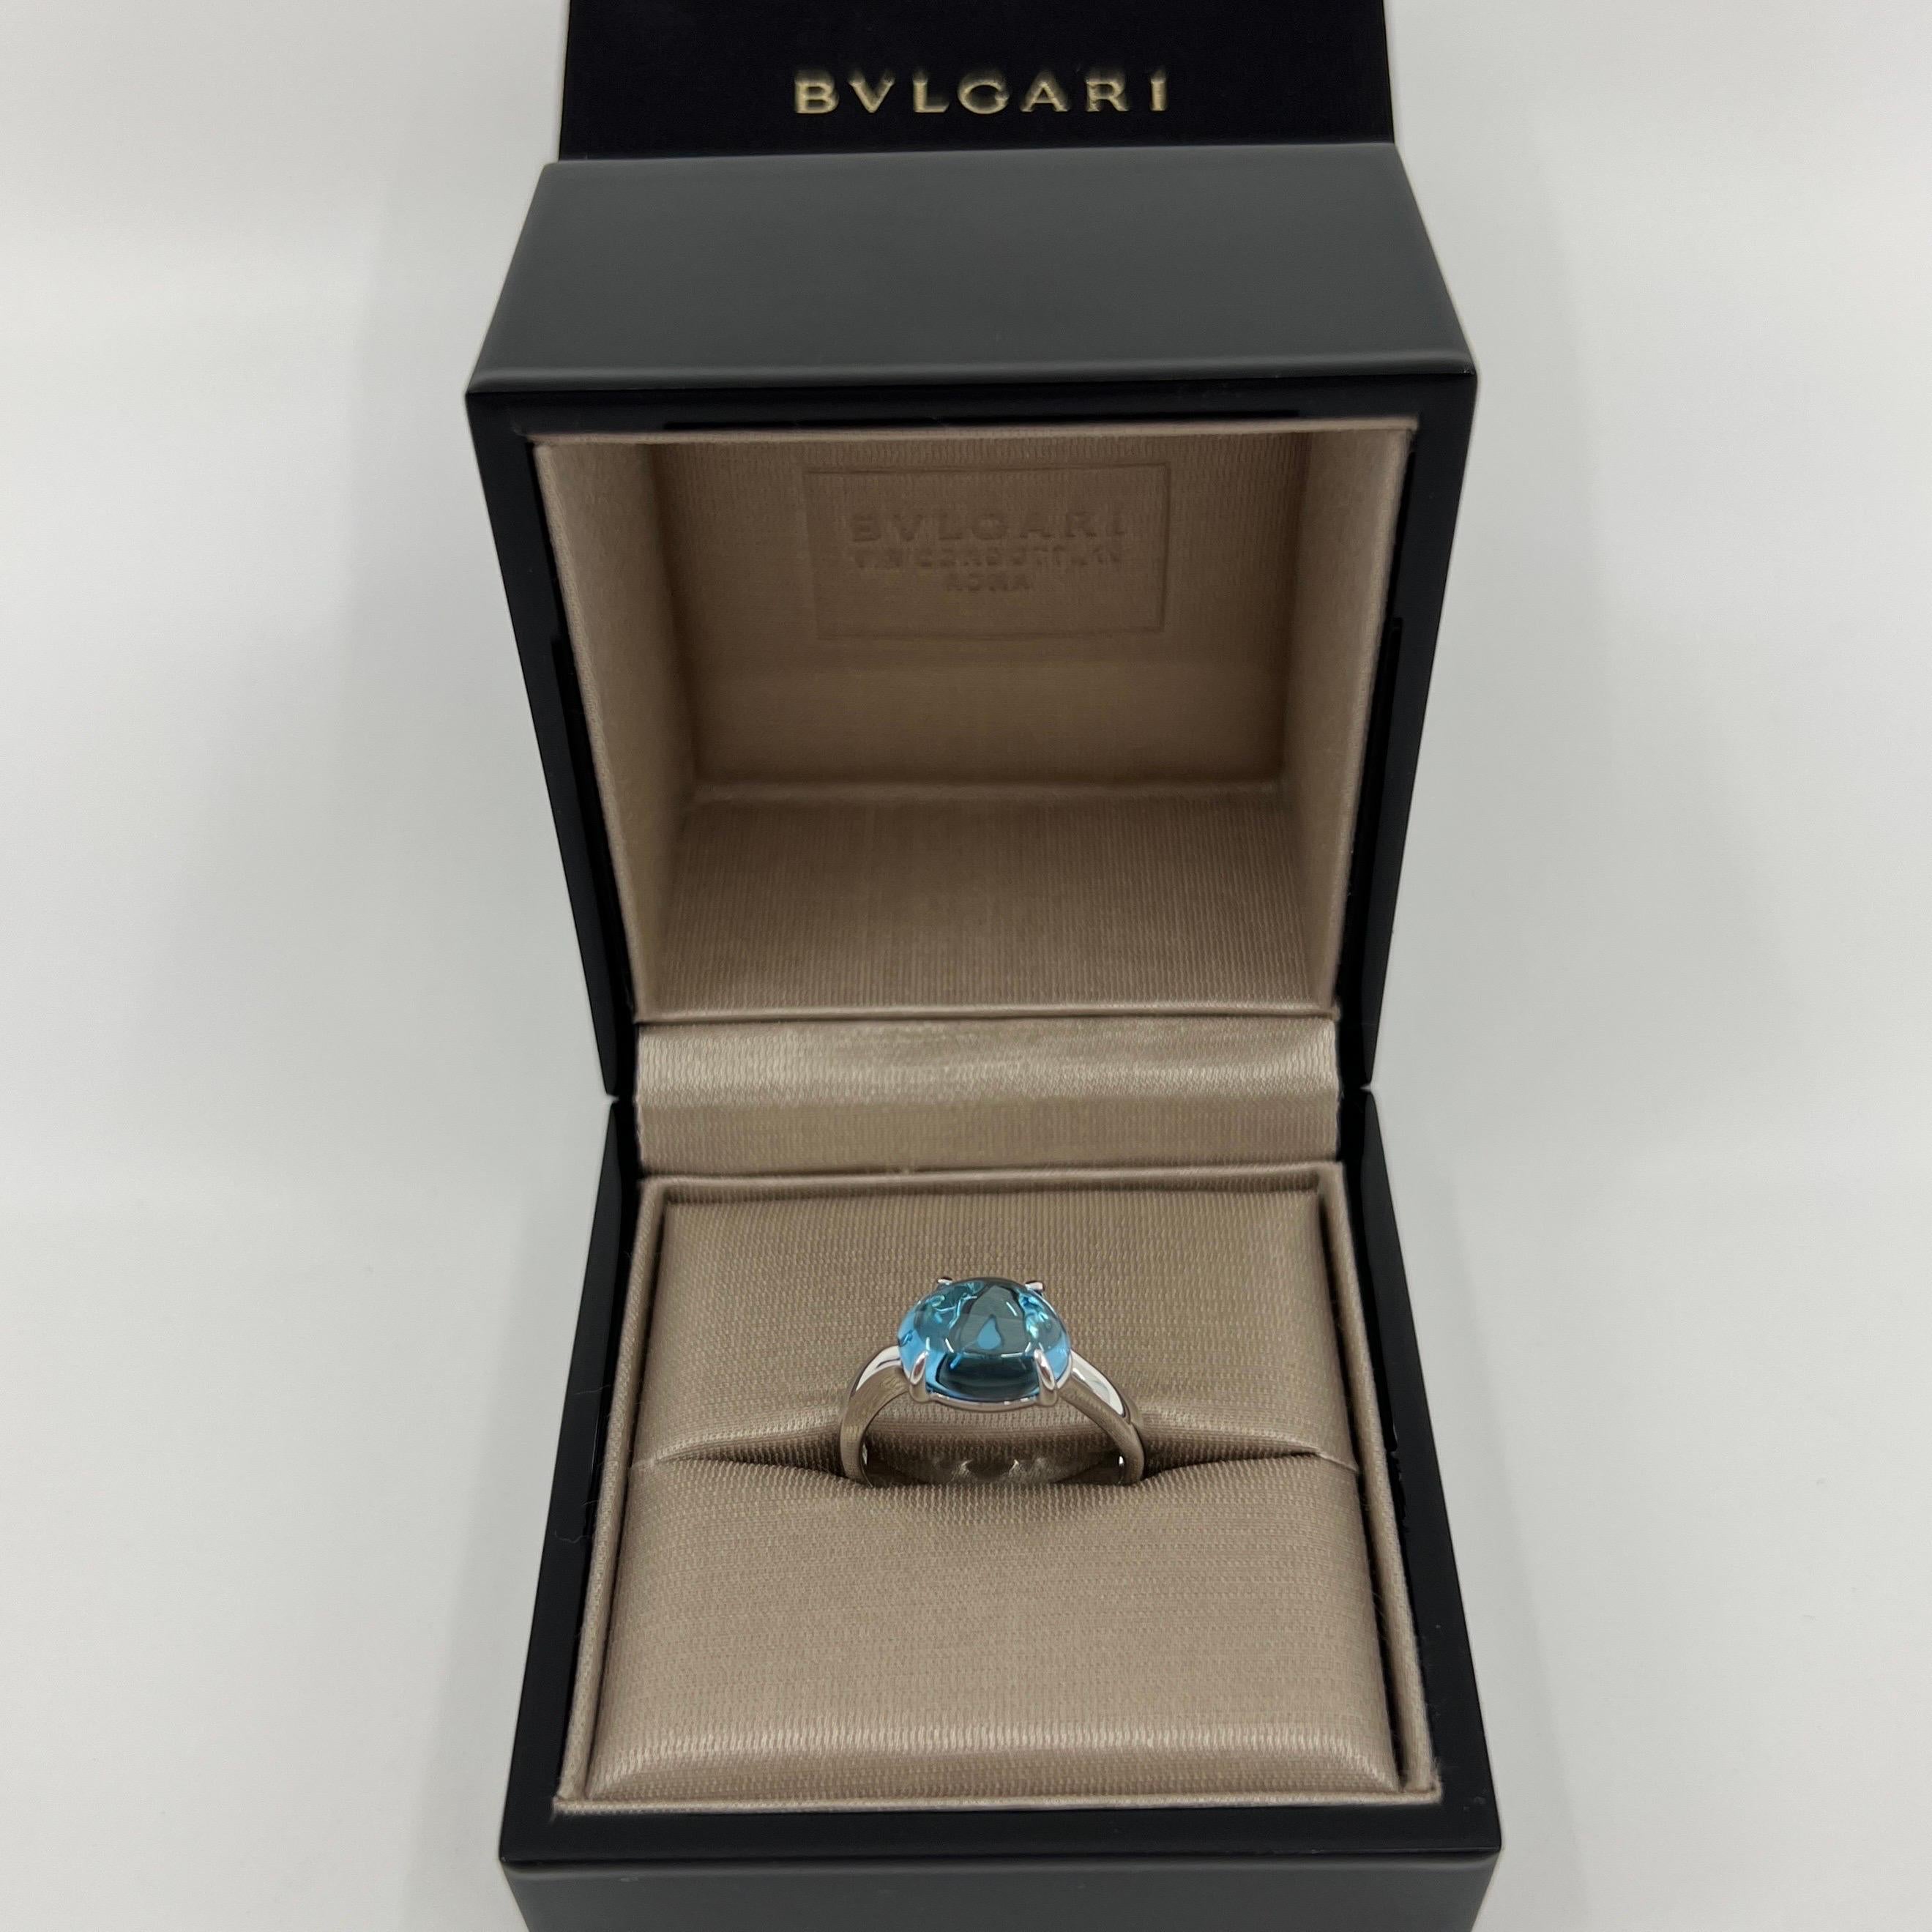 Bvlgari Mediterranean Eden Natural Pear Cut Topaz Cabochon 18k White Gold Ring.

Rare Bvlgari ring featuring a beautiful pear cut cabochon Swiss blue topaz from their Mediterranean Eden range. Fine jewellery houses like Bvlgari only use the finest